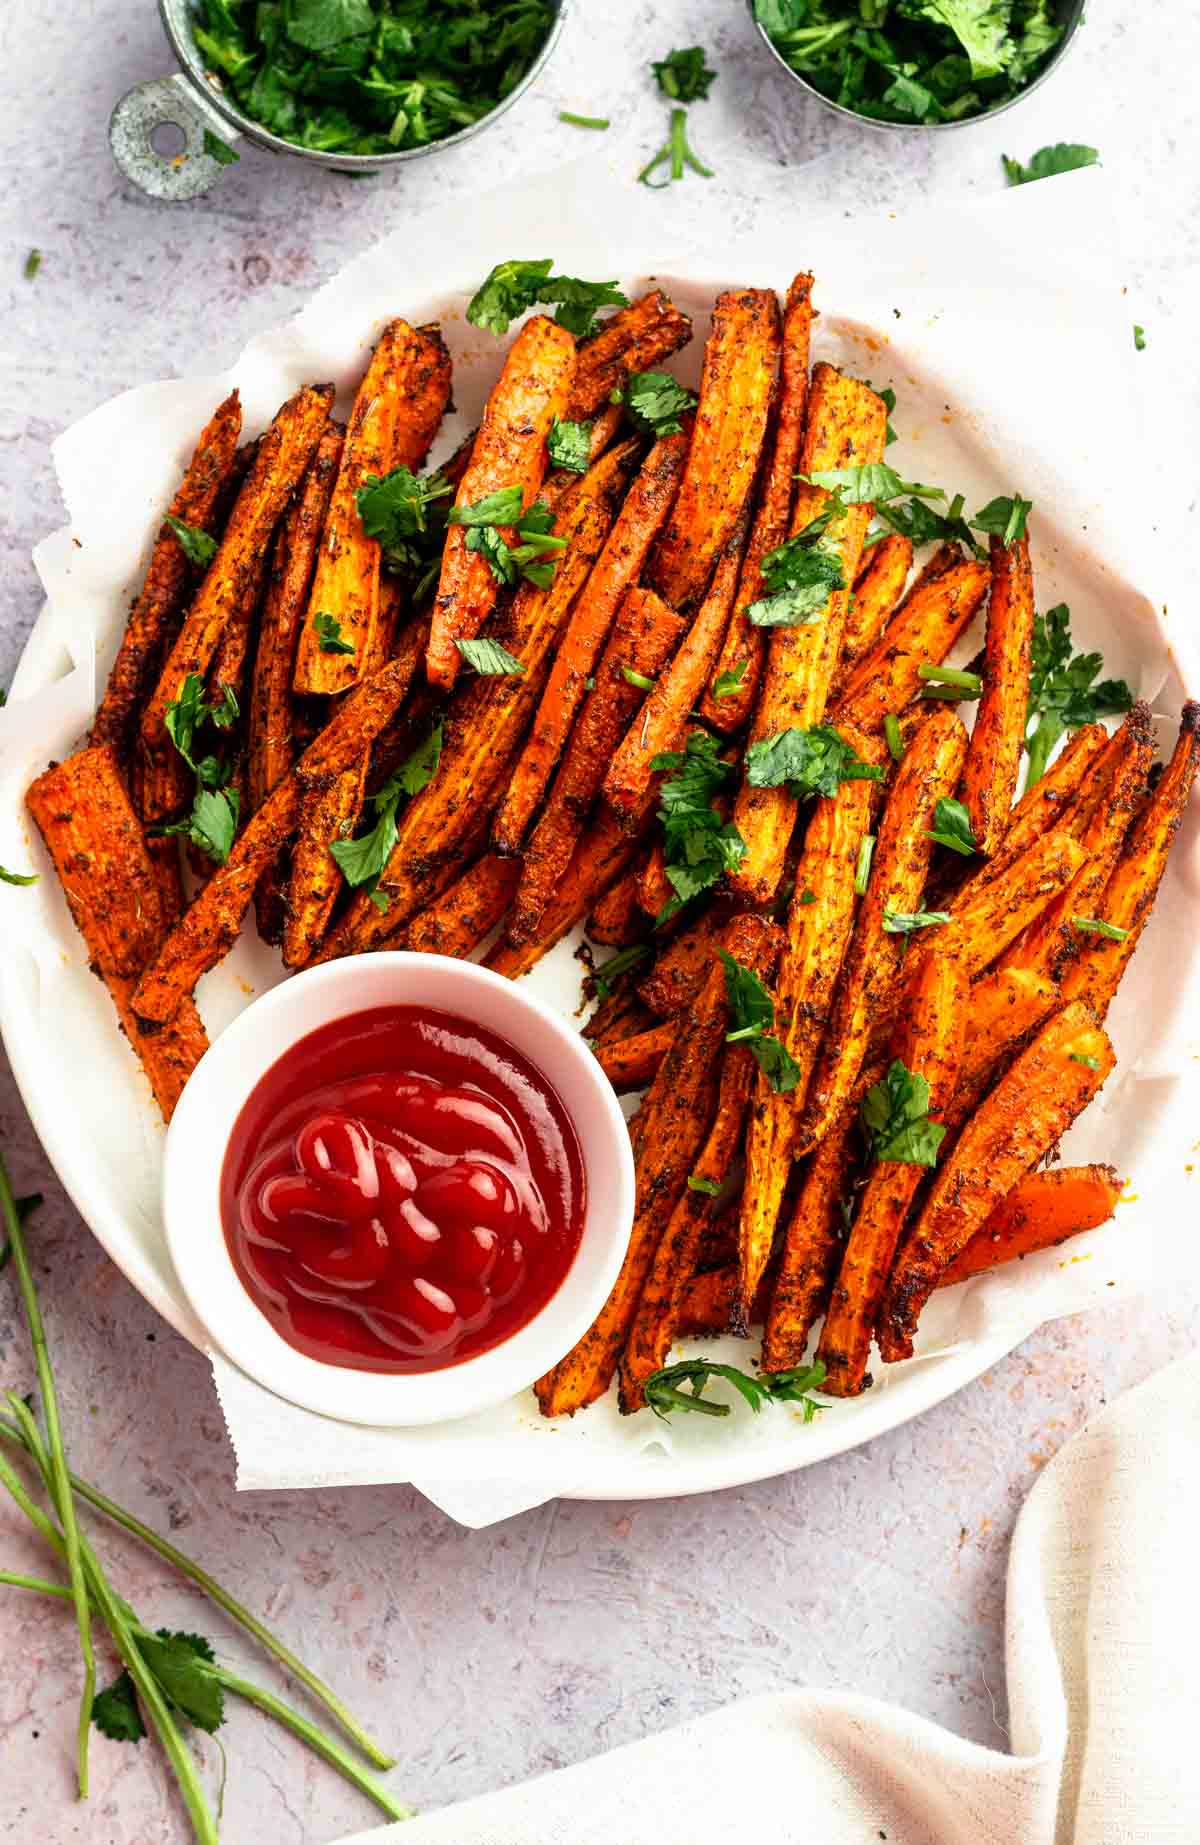 Top of carrot fries.